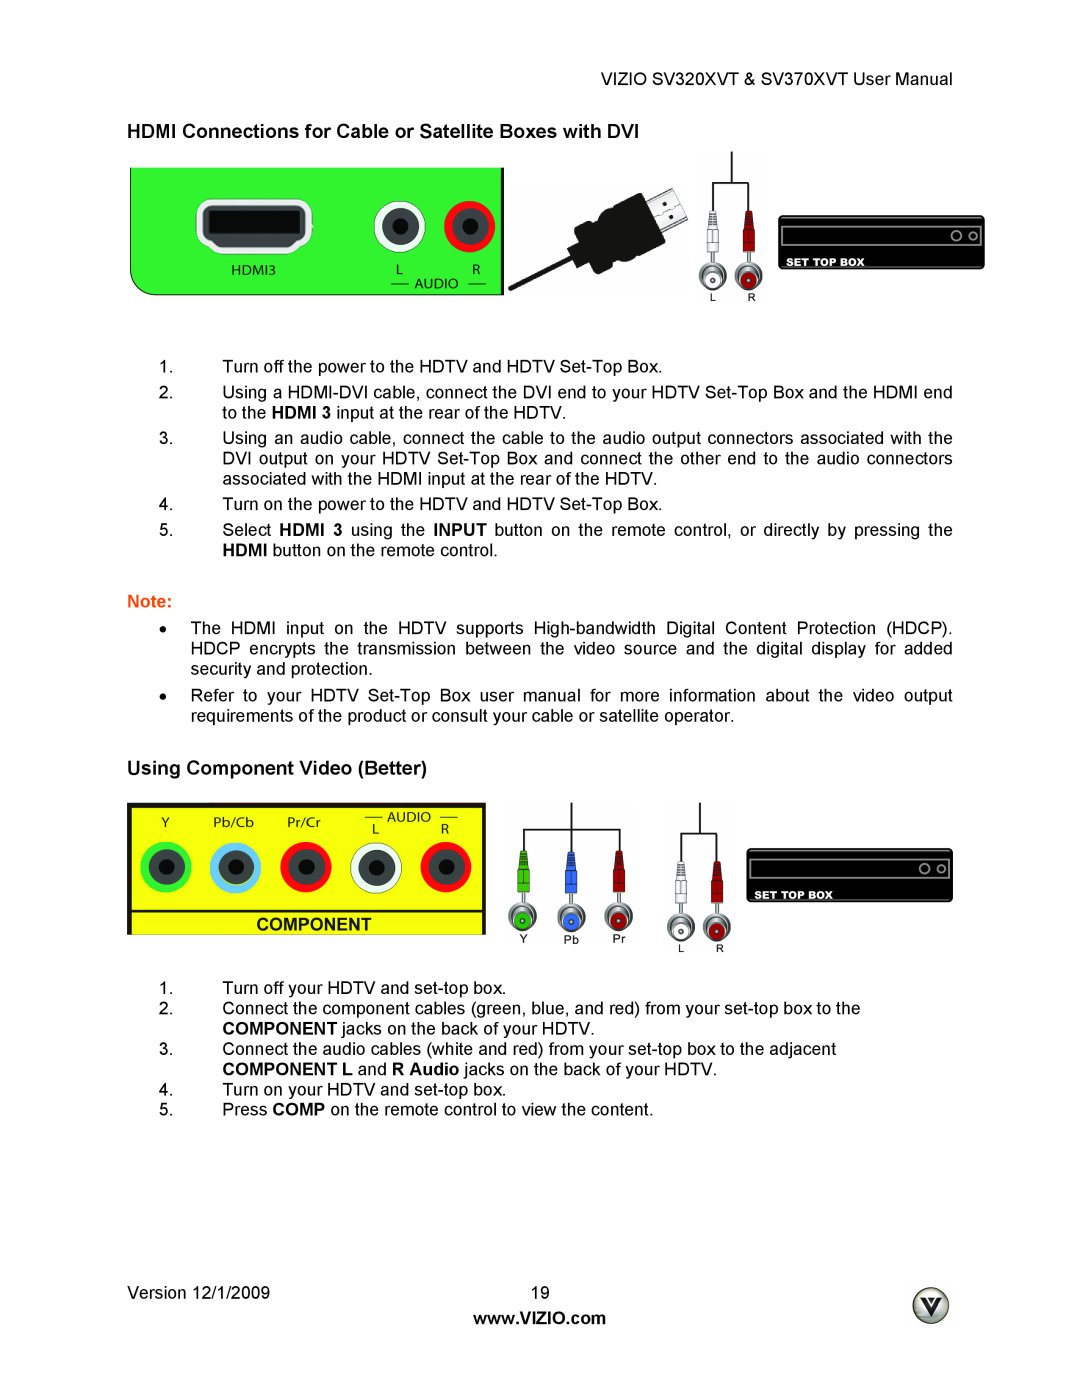 Vizio SV370XVT, SV320XVT user manual HDMI Connections for Cable or Satellite Boxes with DVI, Using Component Video Better 